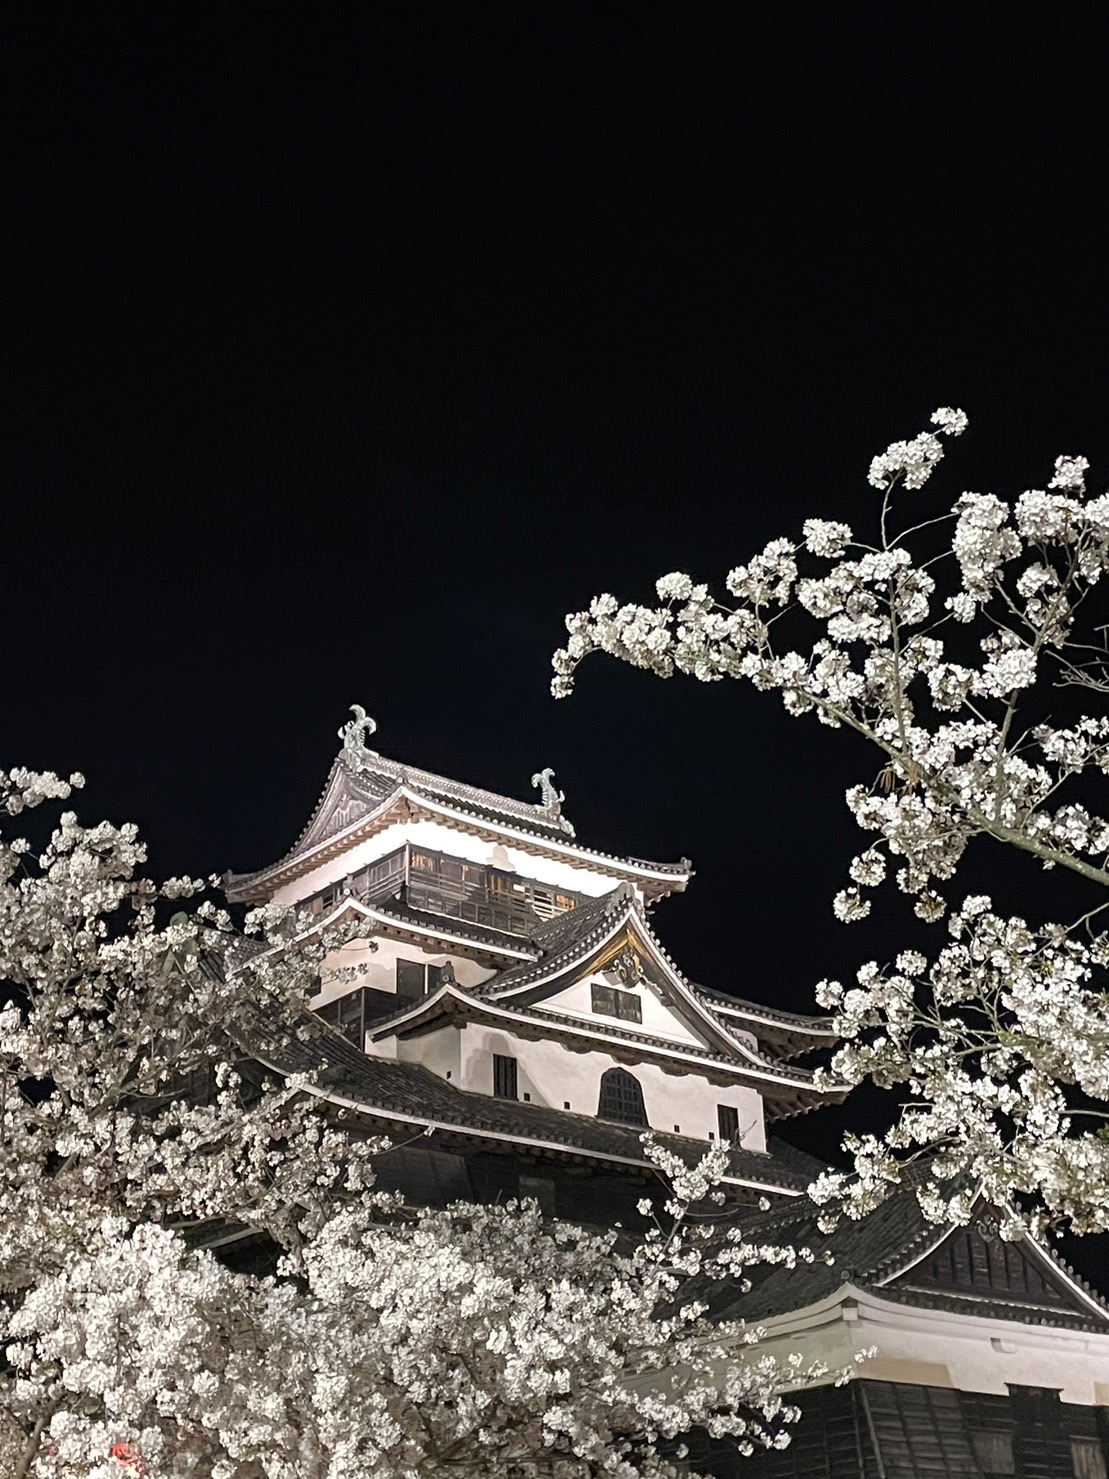 The outside building of the Matsue Castle in Shimane Prefecture at nighttime with cherry blossoms surrounding the building